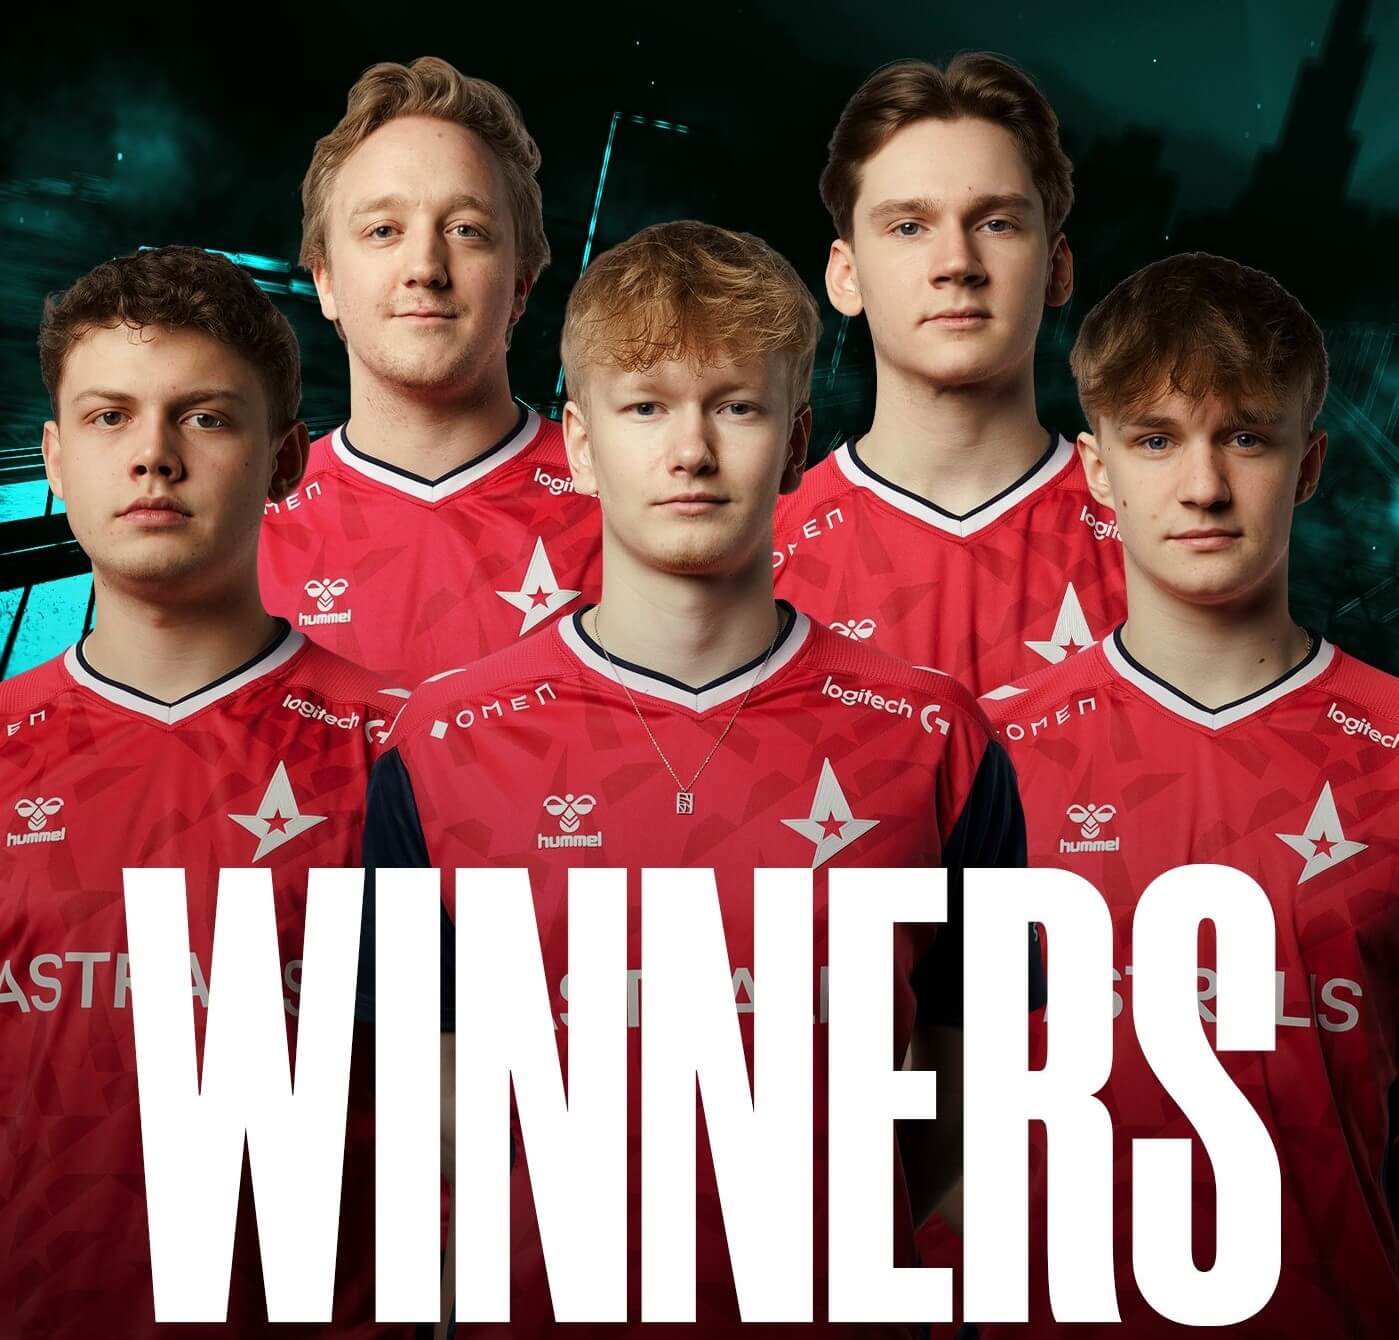 CCT North Europe Series 4 won by Astralis Talent